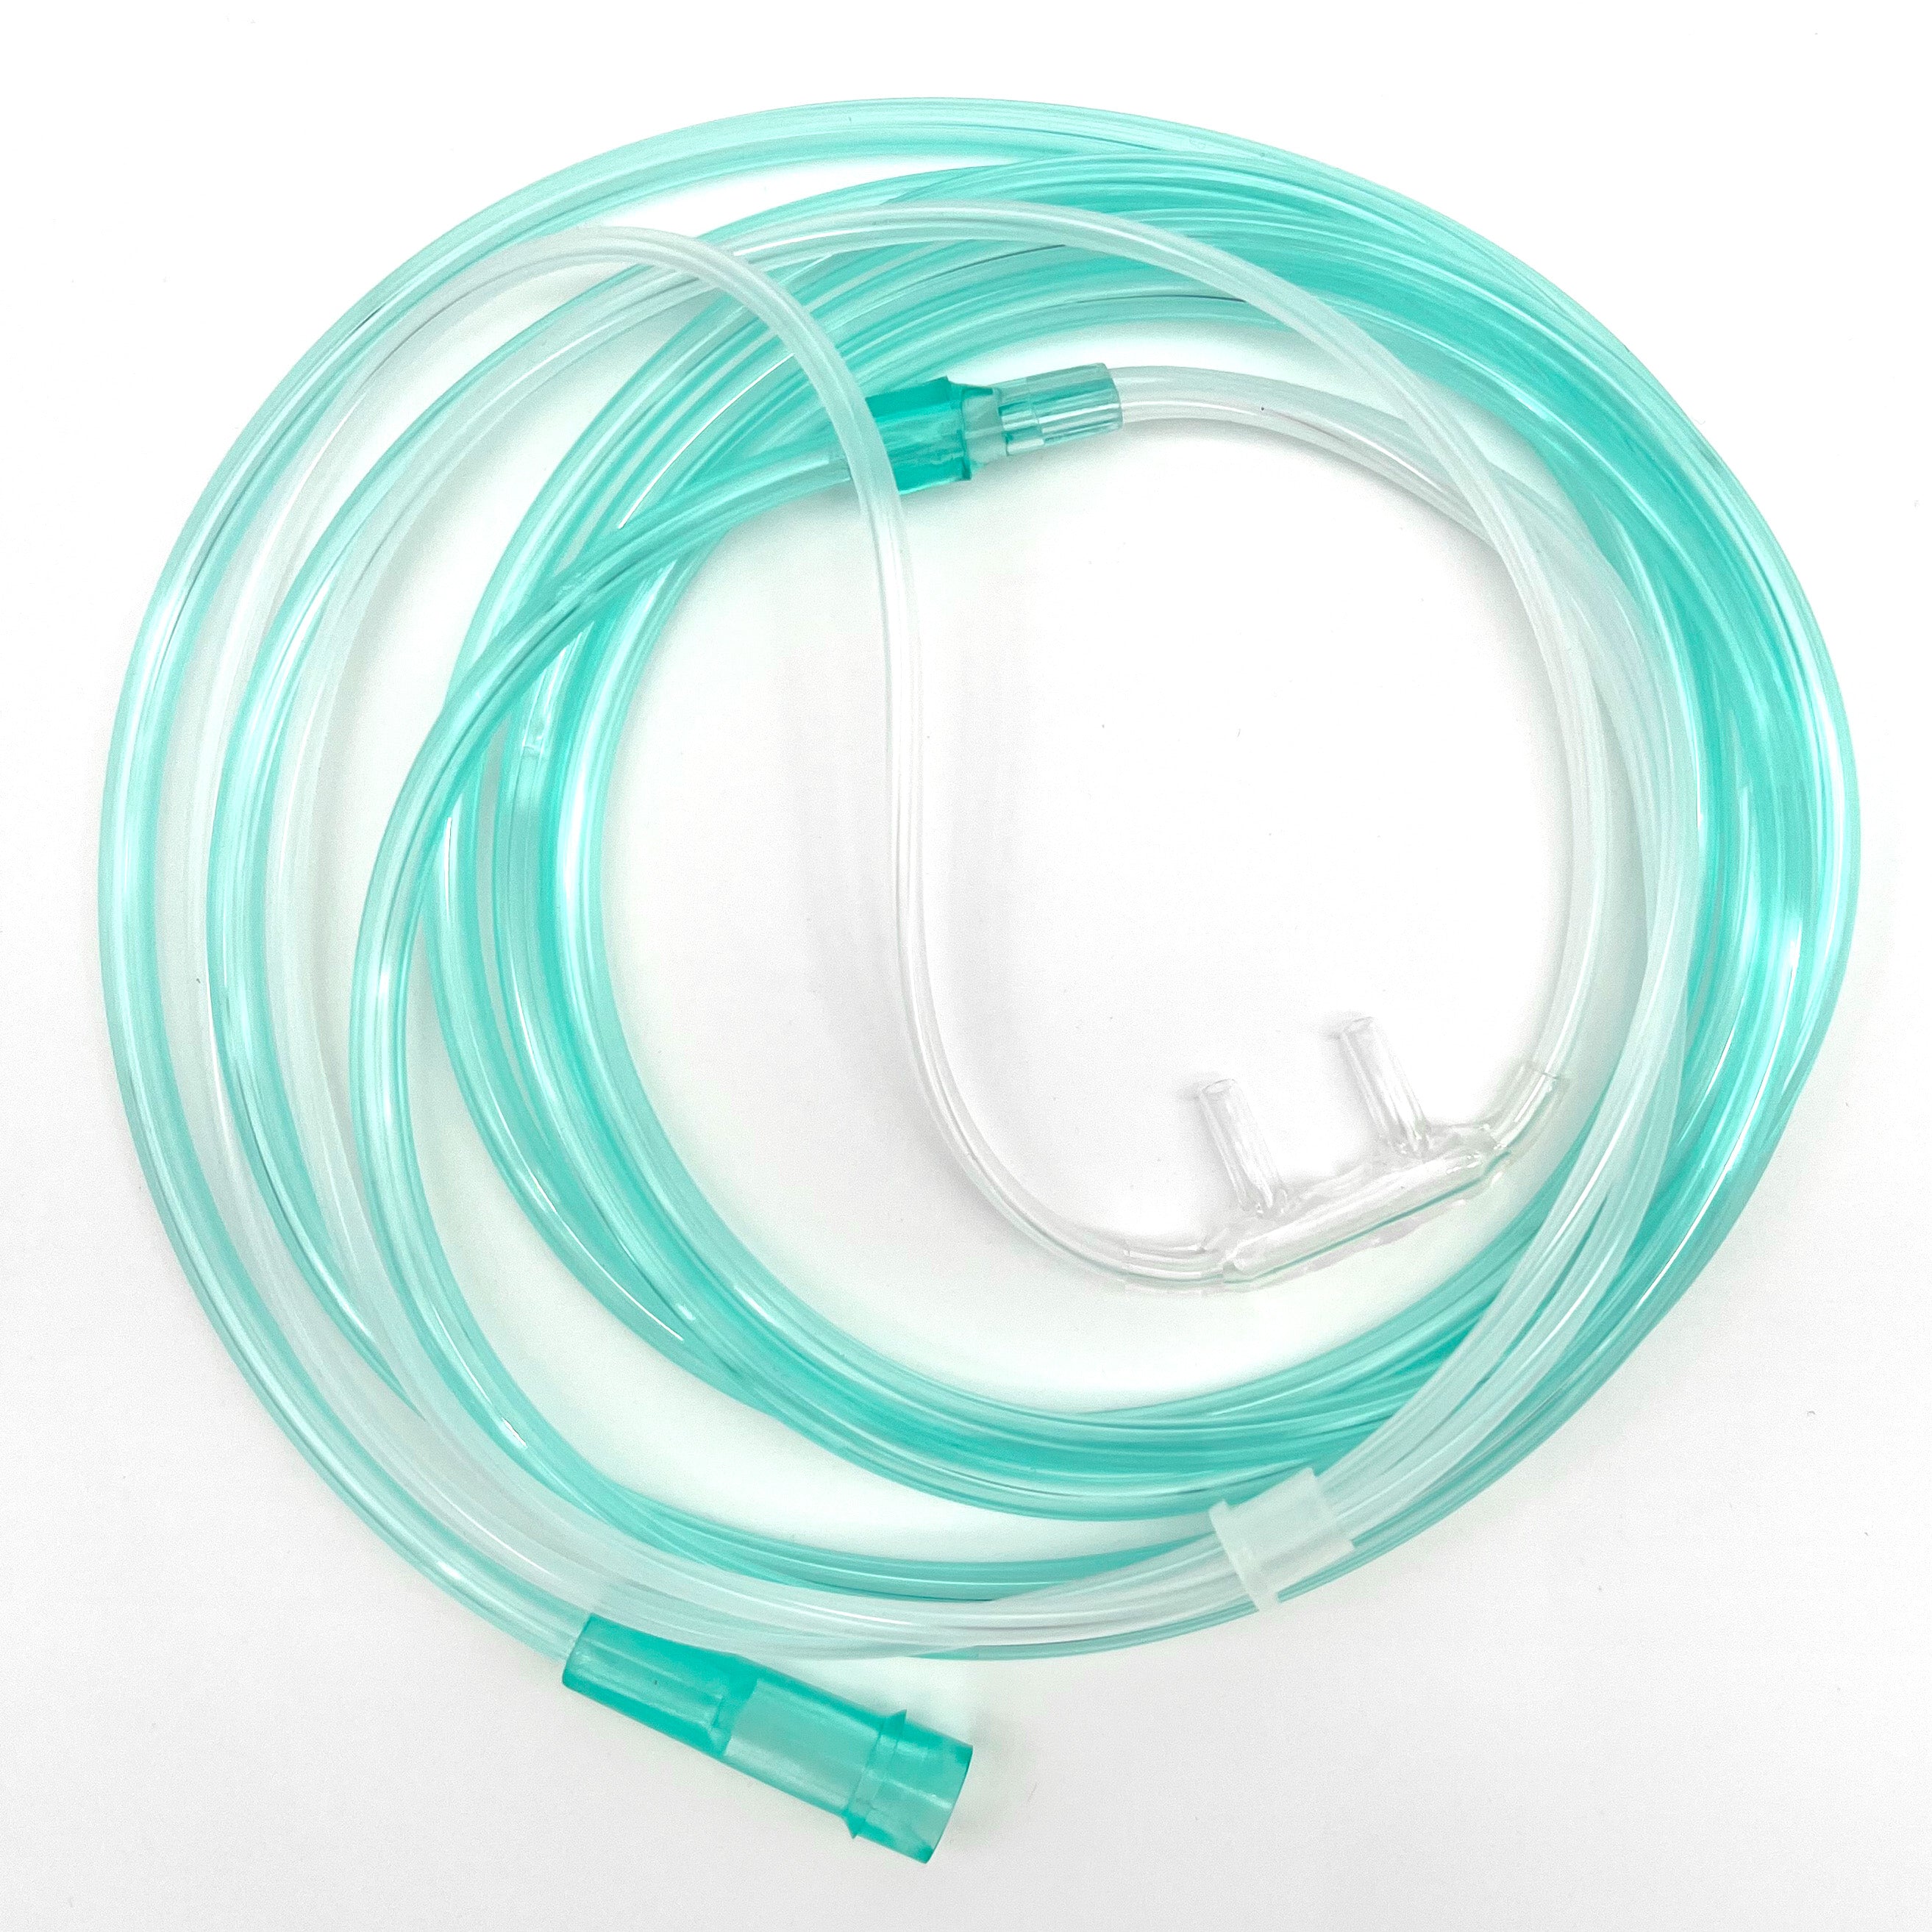 Drive DeVilbiss Extra Soft Cozy Nasal Cannula with 7 Foot Green Oxygen Supply Tubing